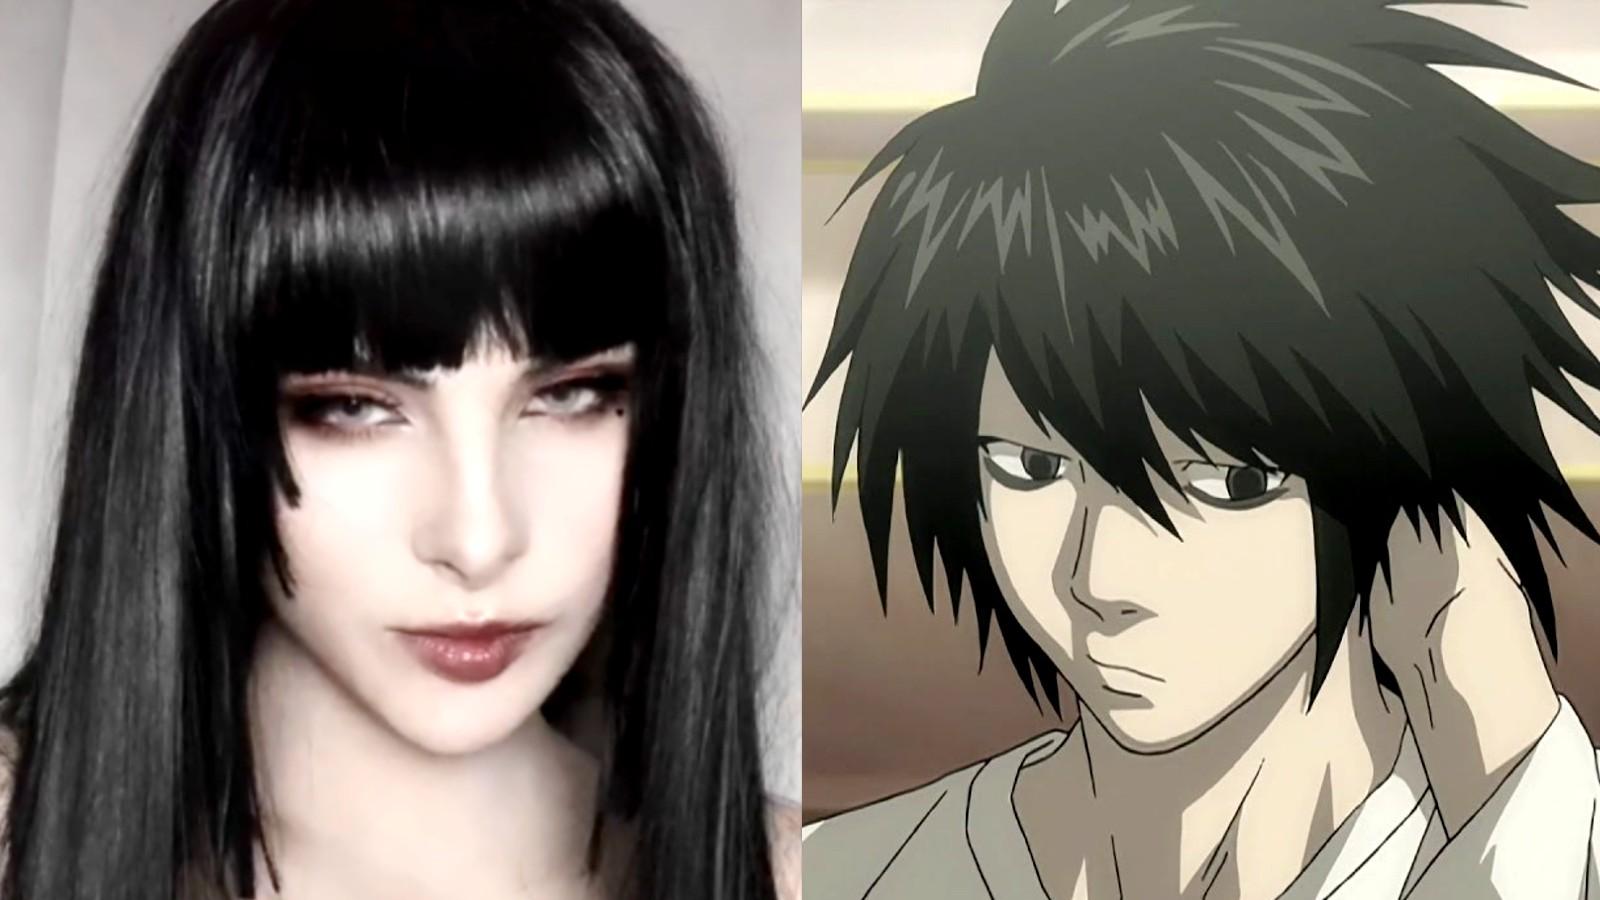 Cosplayer cospoxia next to L from Death Note